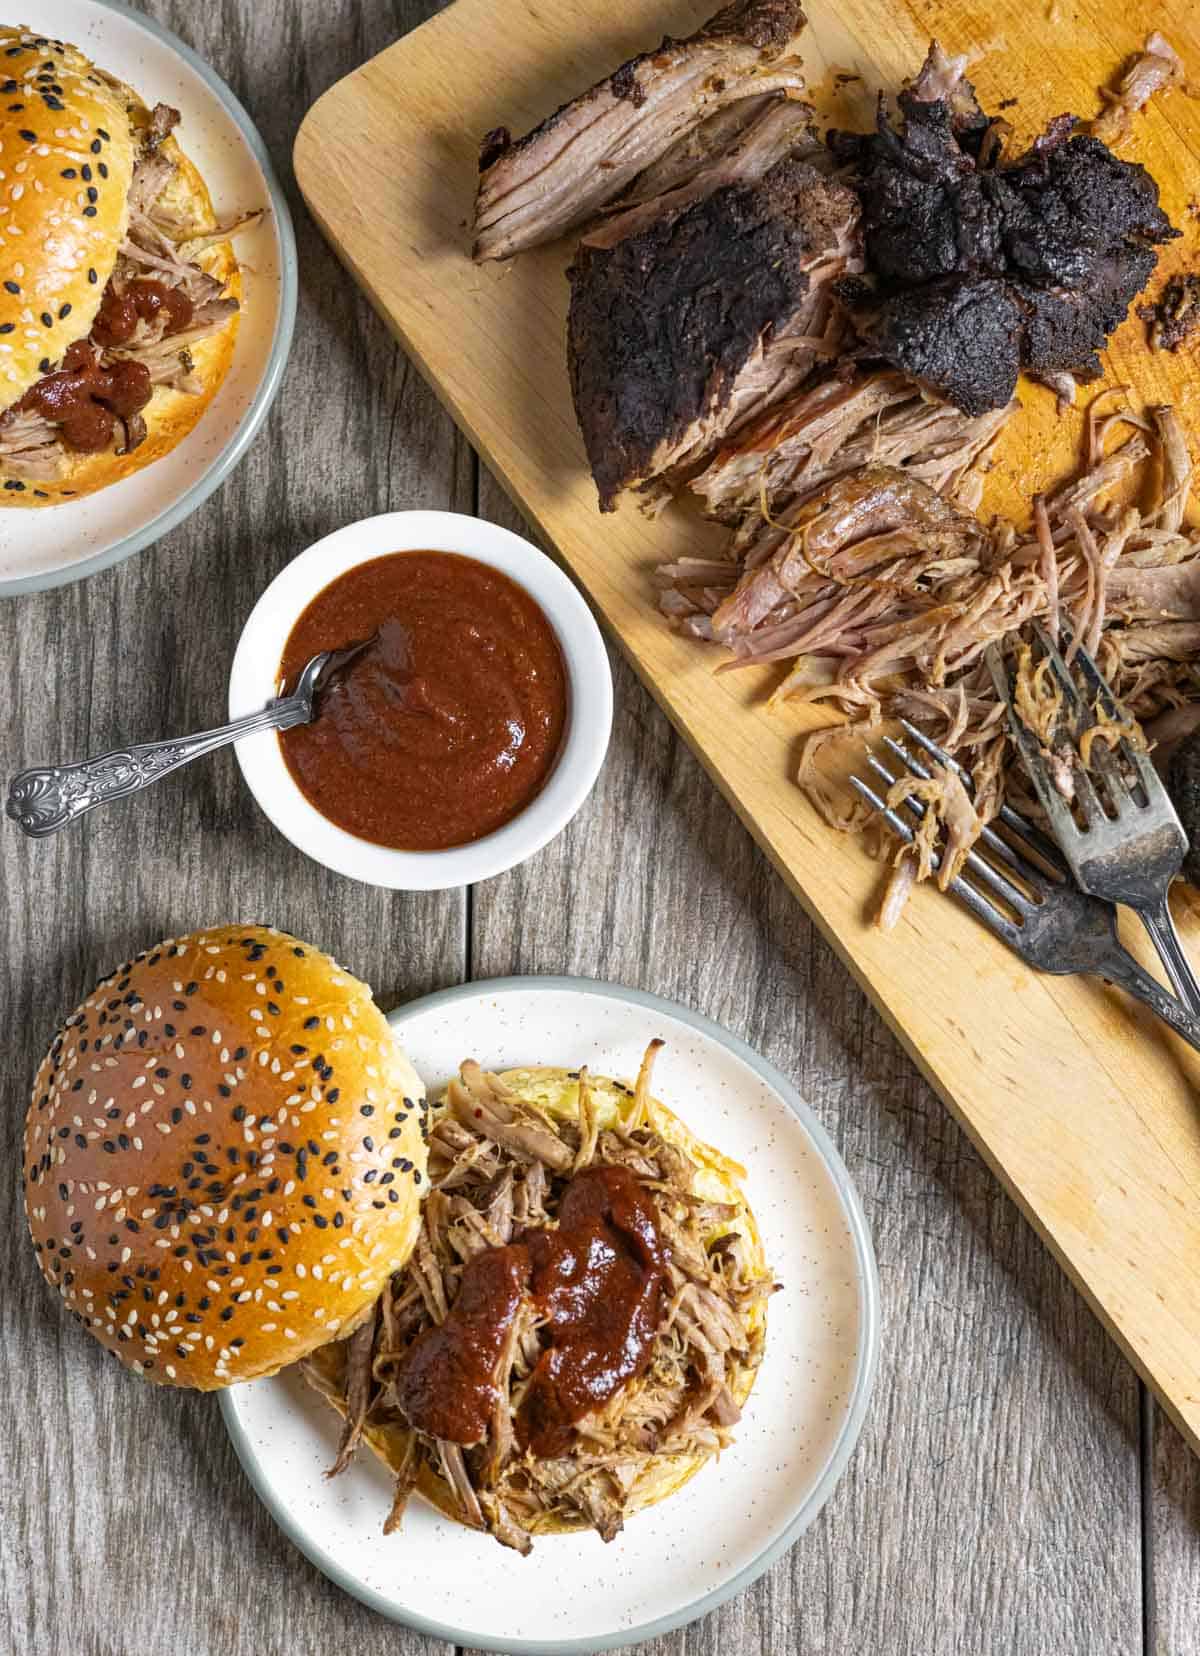 Board of pulled pork with plates of sesame buns filled with pork and sauce with a small bowl of sauce.